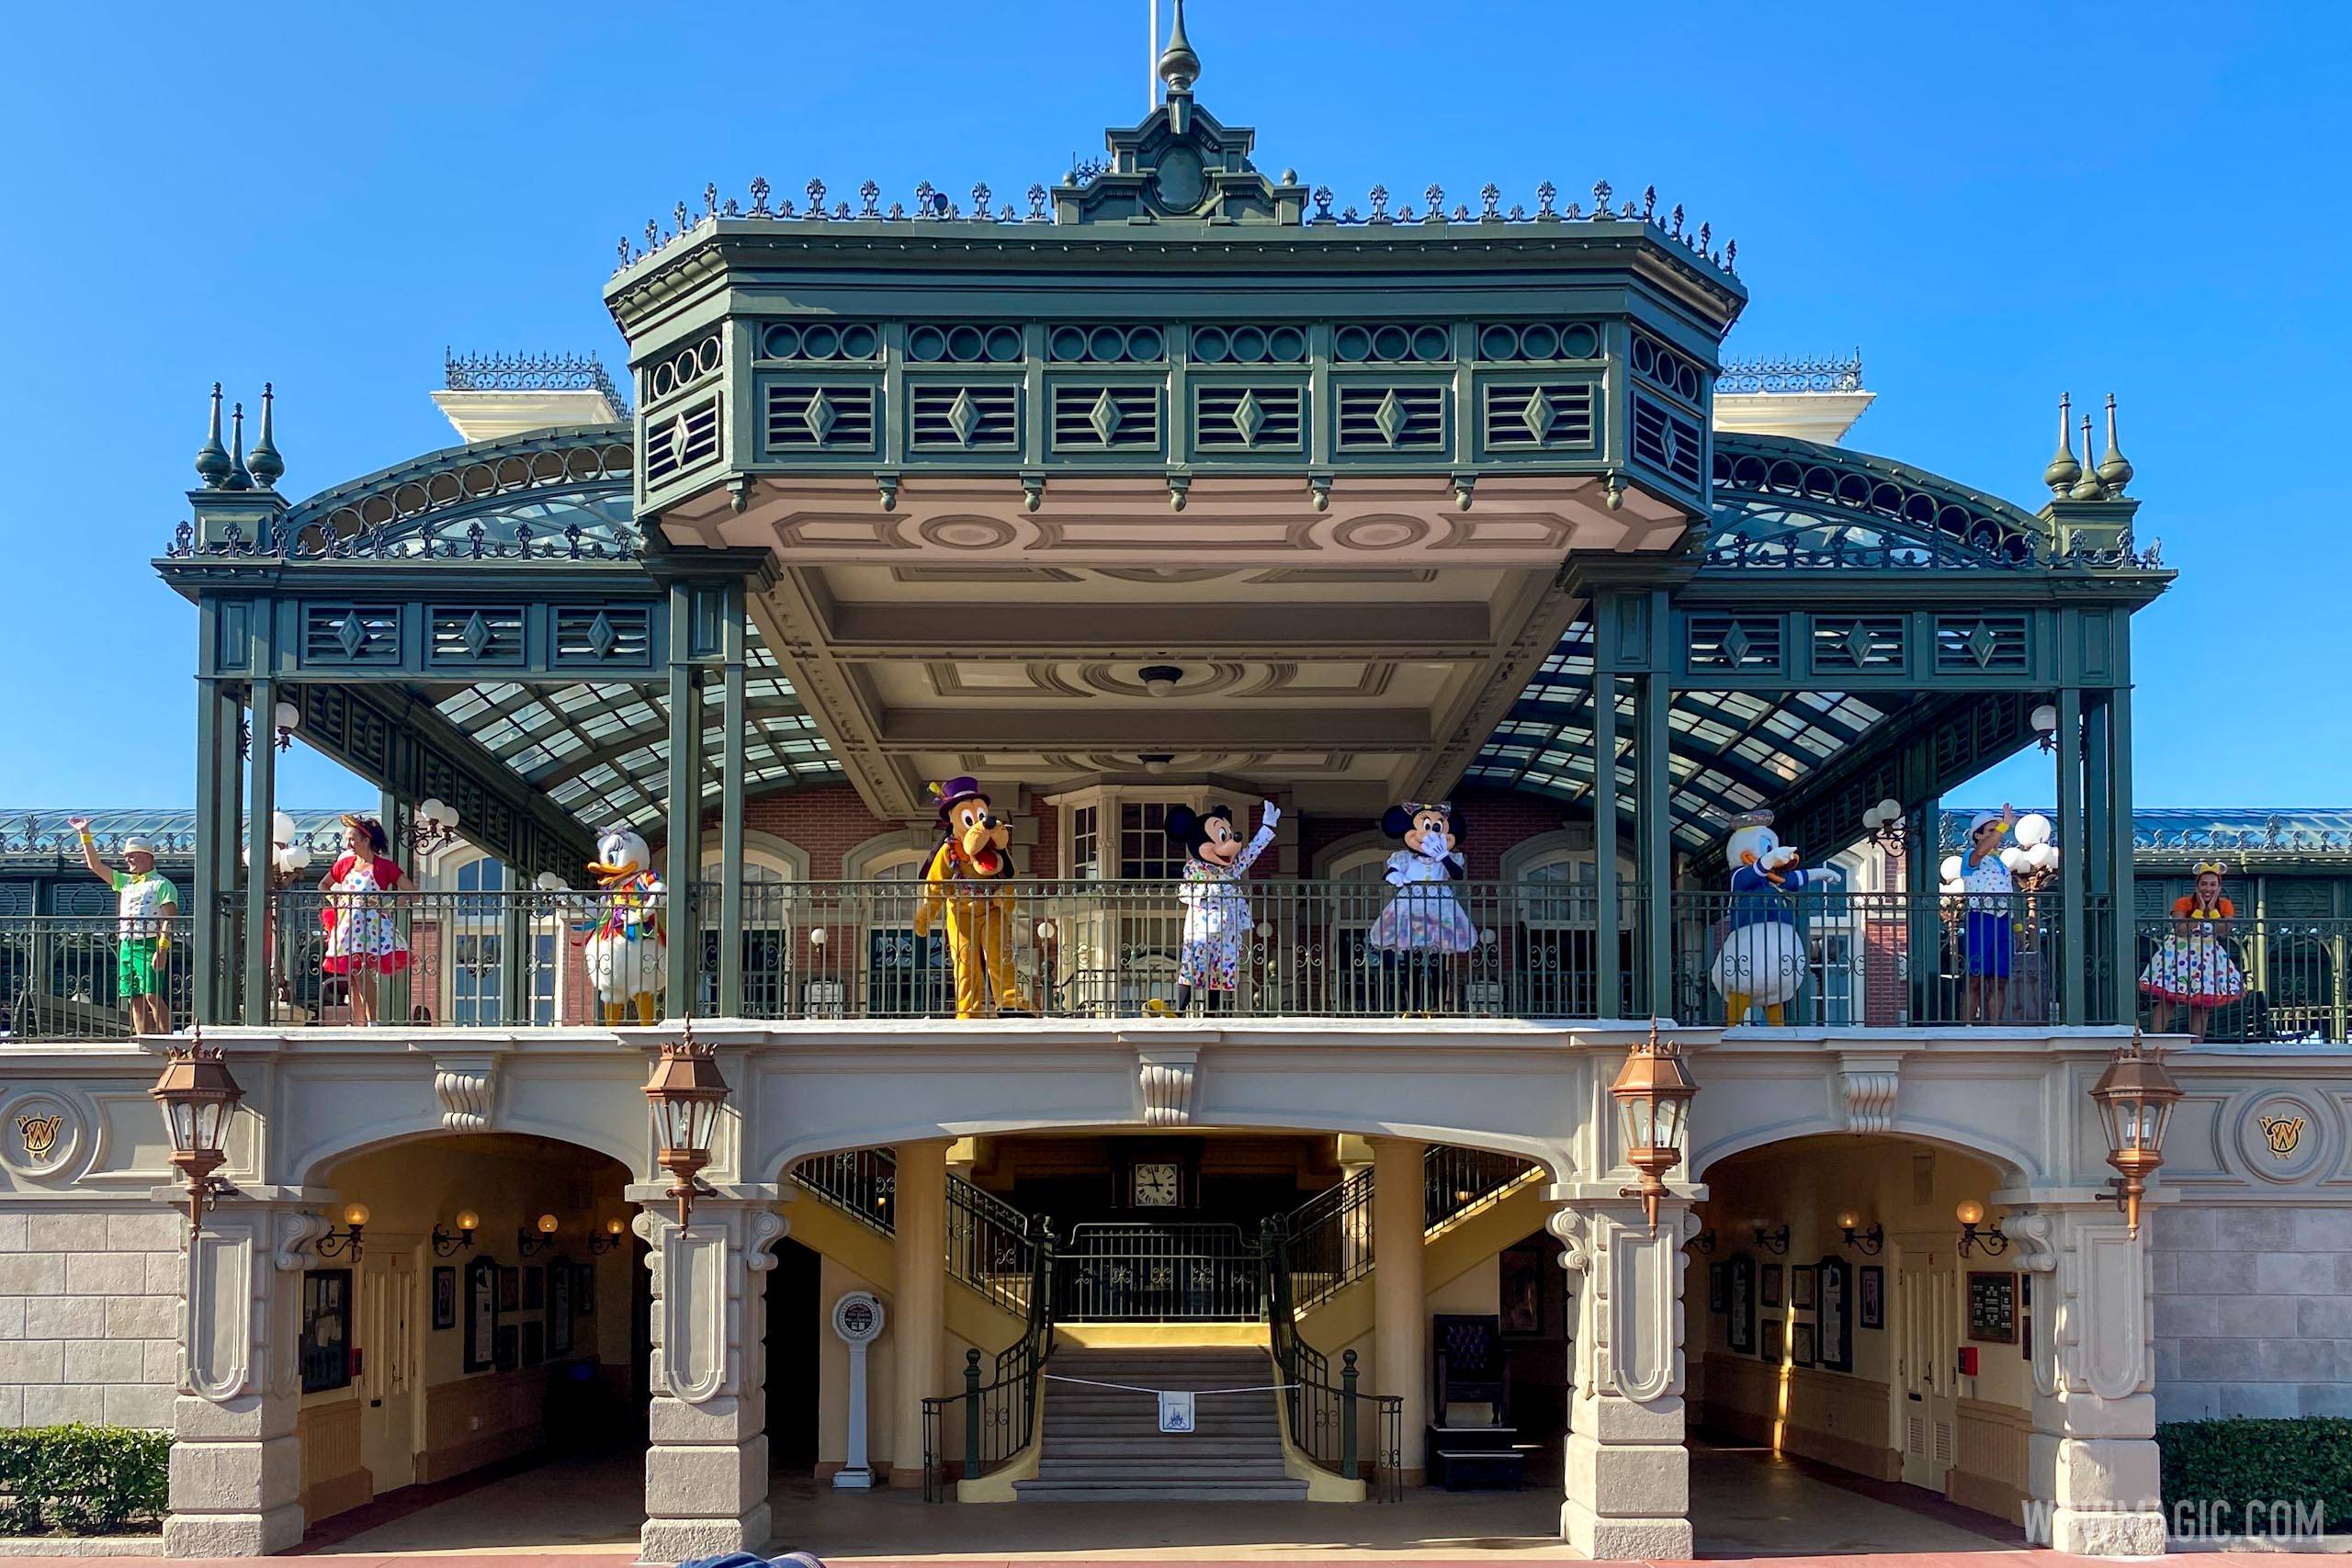 Magic Kingdom will reopen to guests on July 11